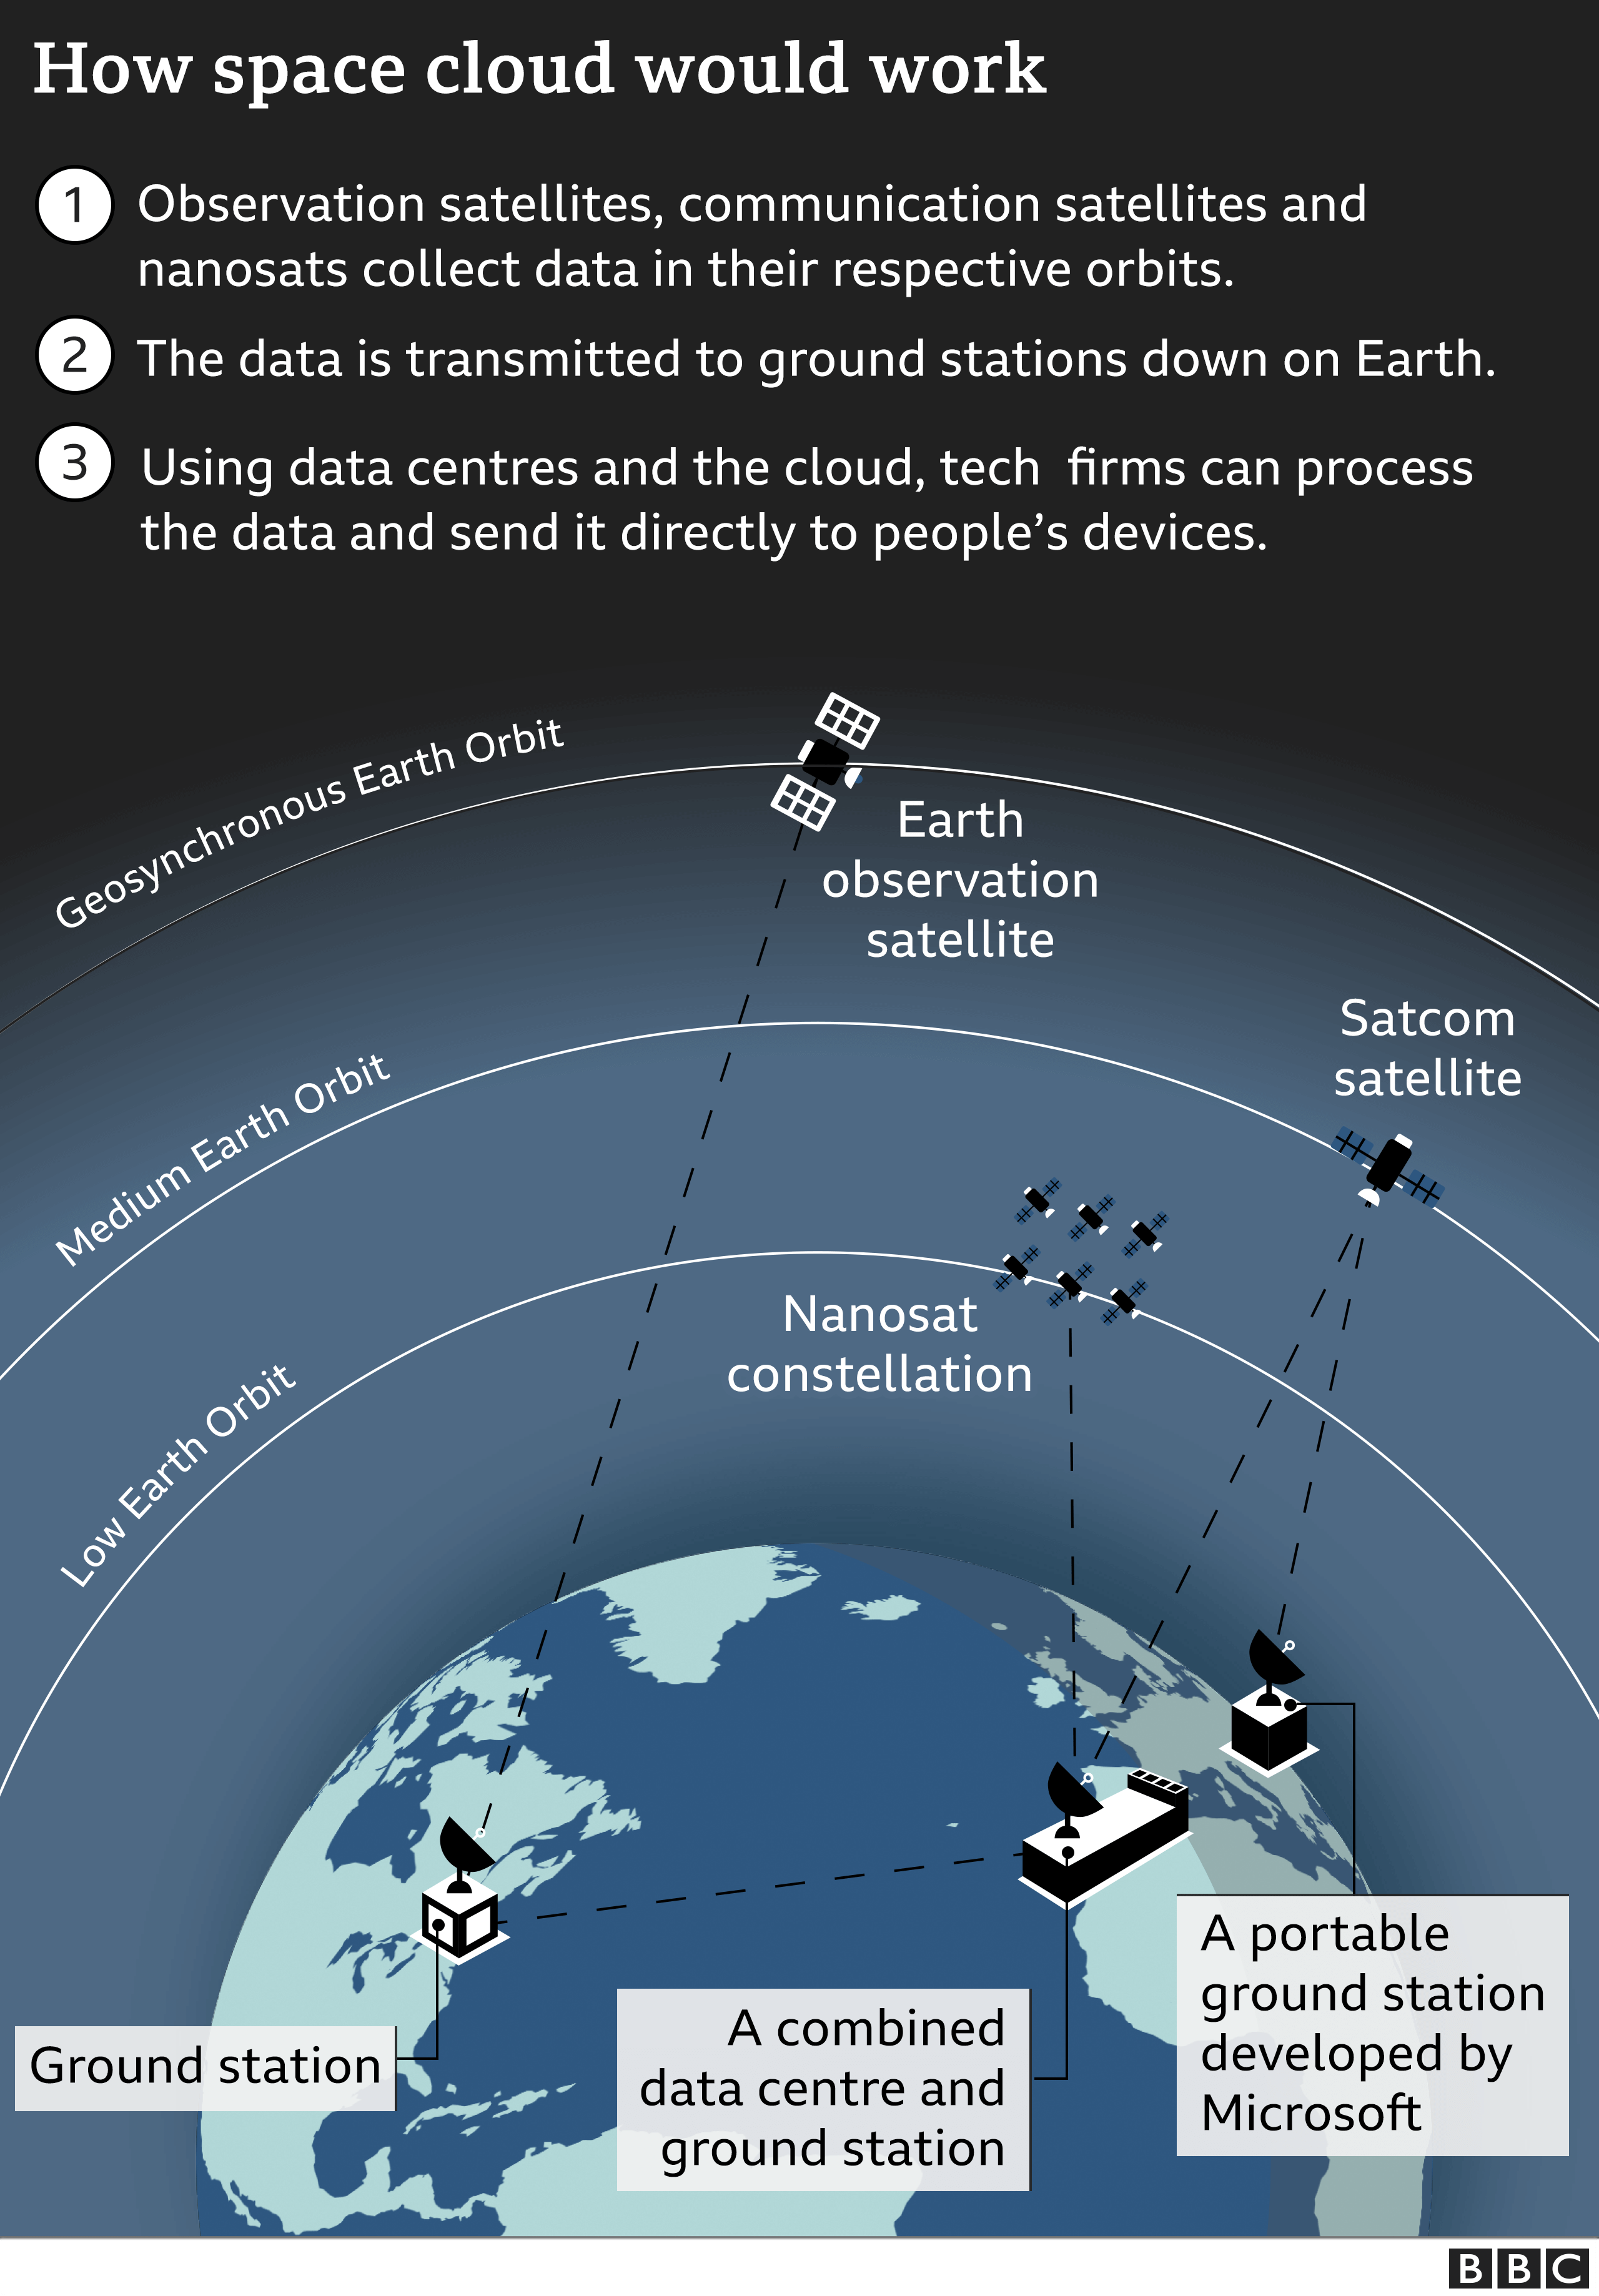 How space cloud would work